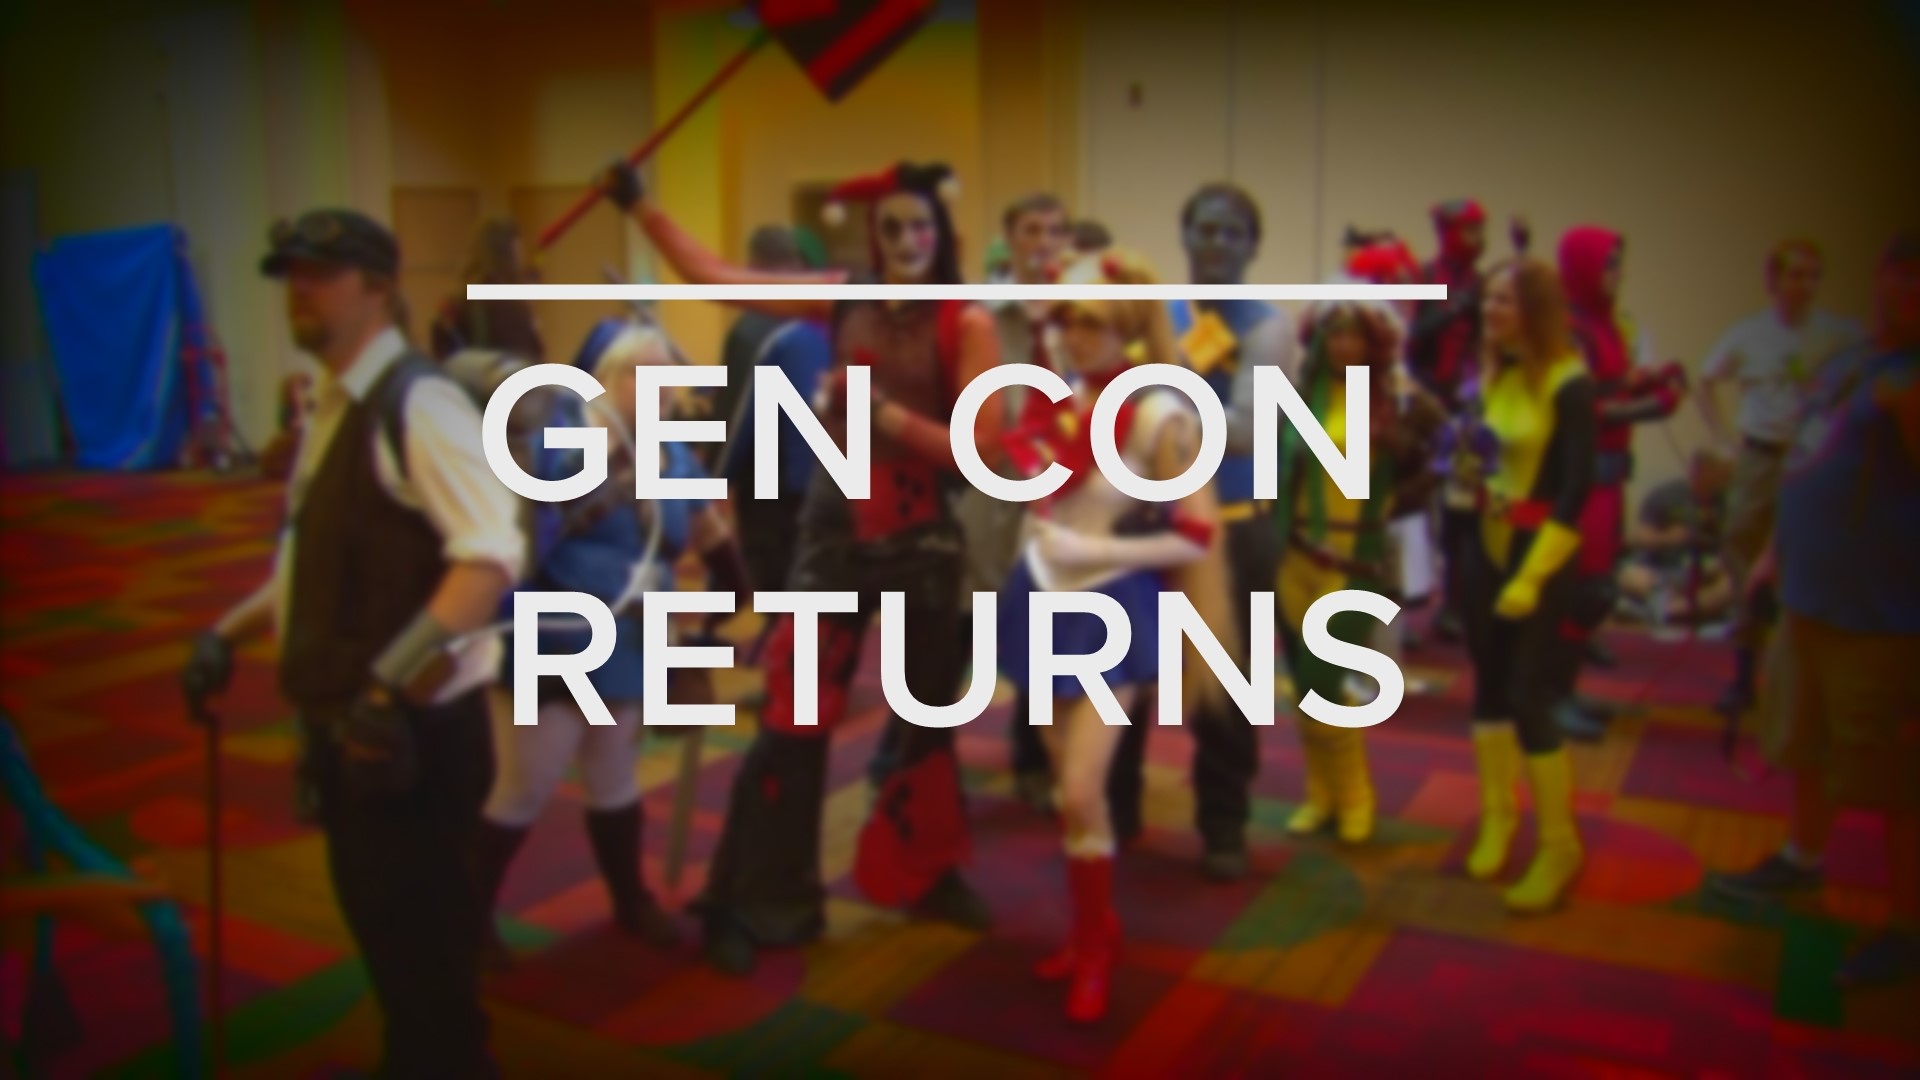 We preview one of the largest conventions in Indy and the country as the 55th year of Gen Con and the biggest weekend in gaming returns!